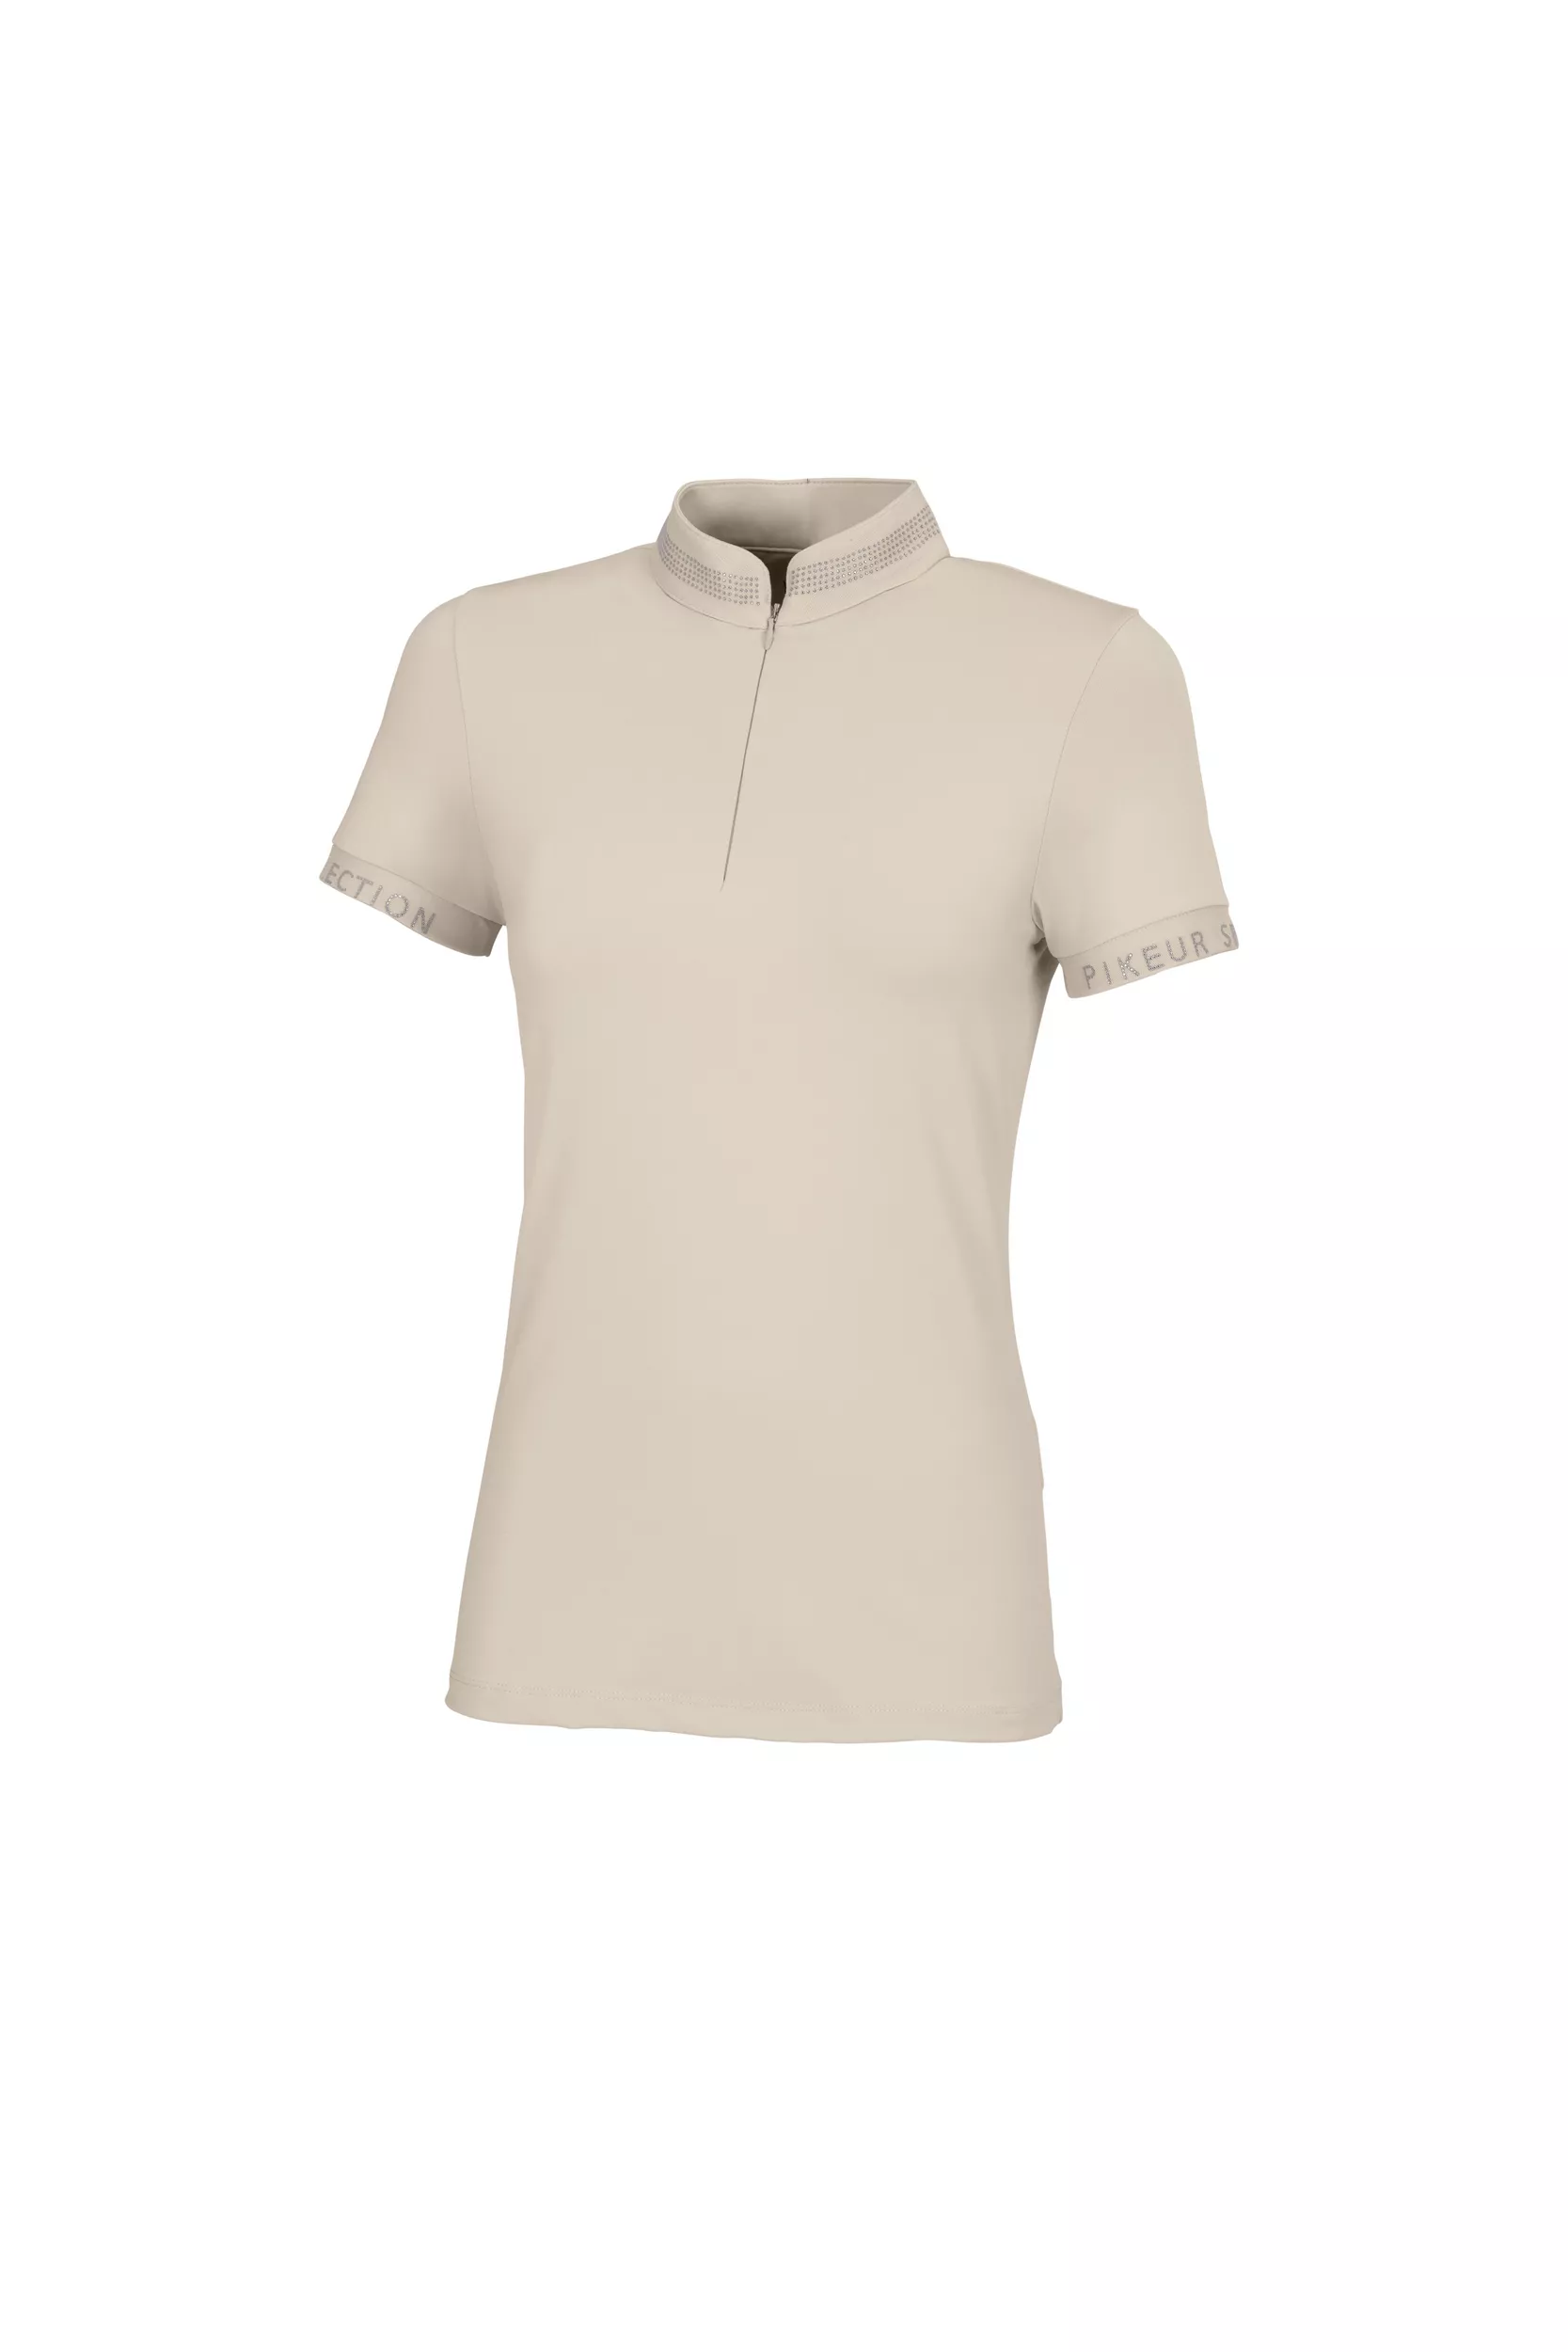 PERNILLE Shirt, Ladies, Selection 22, ivory